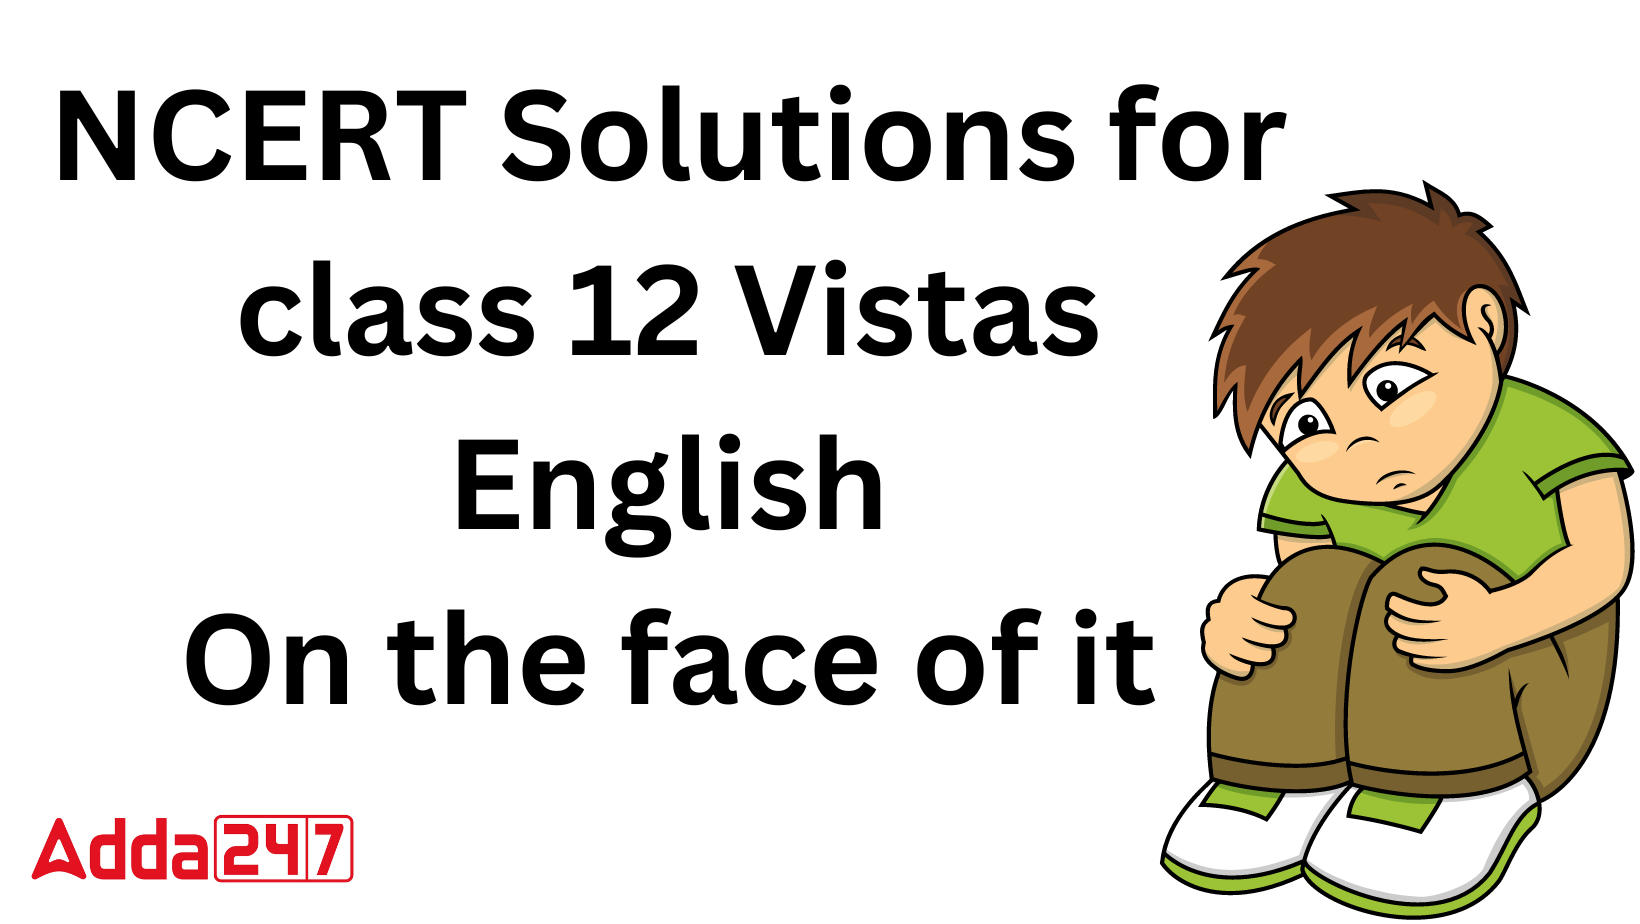 NCERT Solutions for class 12 Vistas English On the face of it